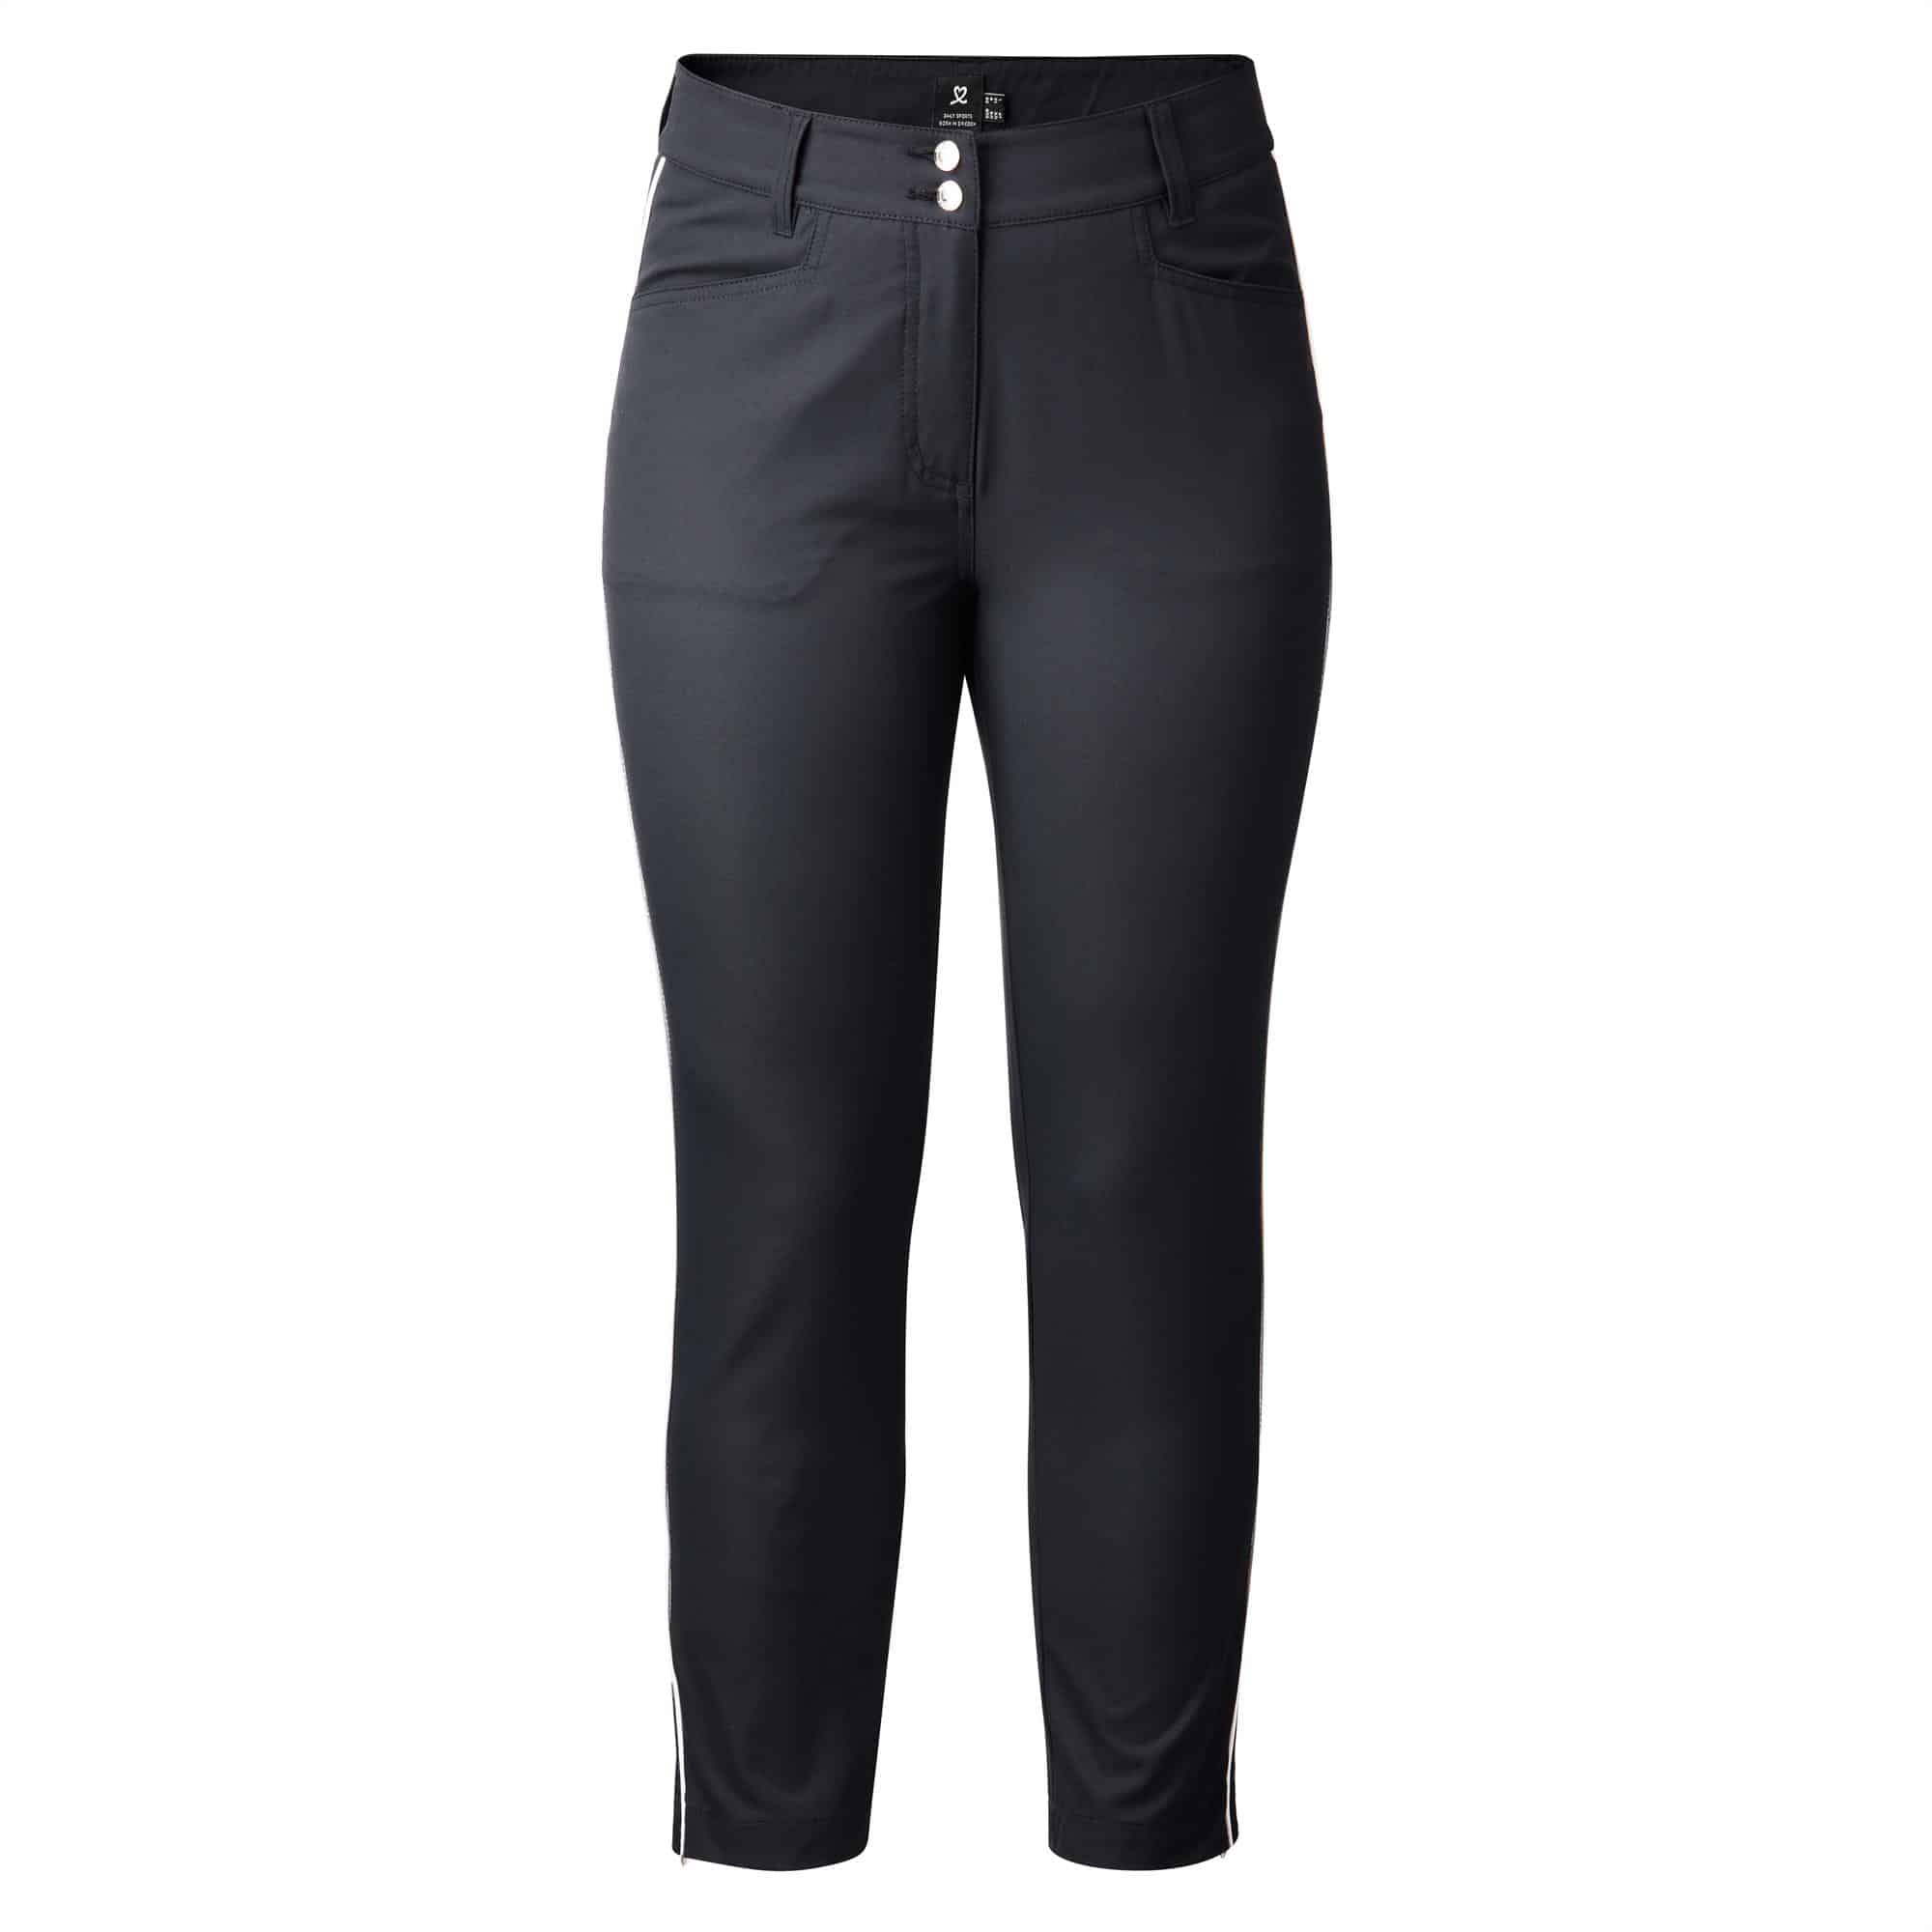 Daily Sports Magic Straight 32 Inch Black - Trousers Ladies